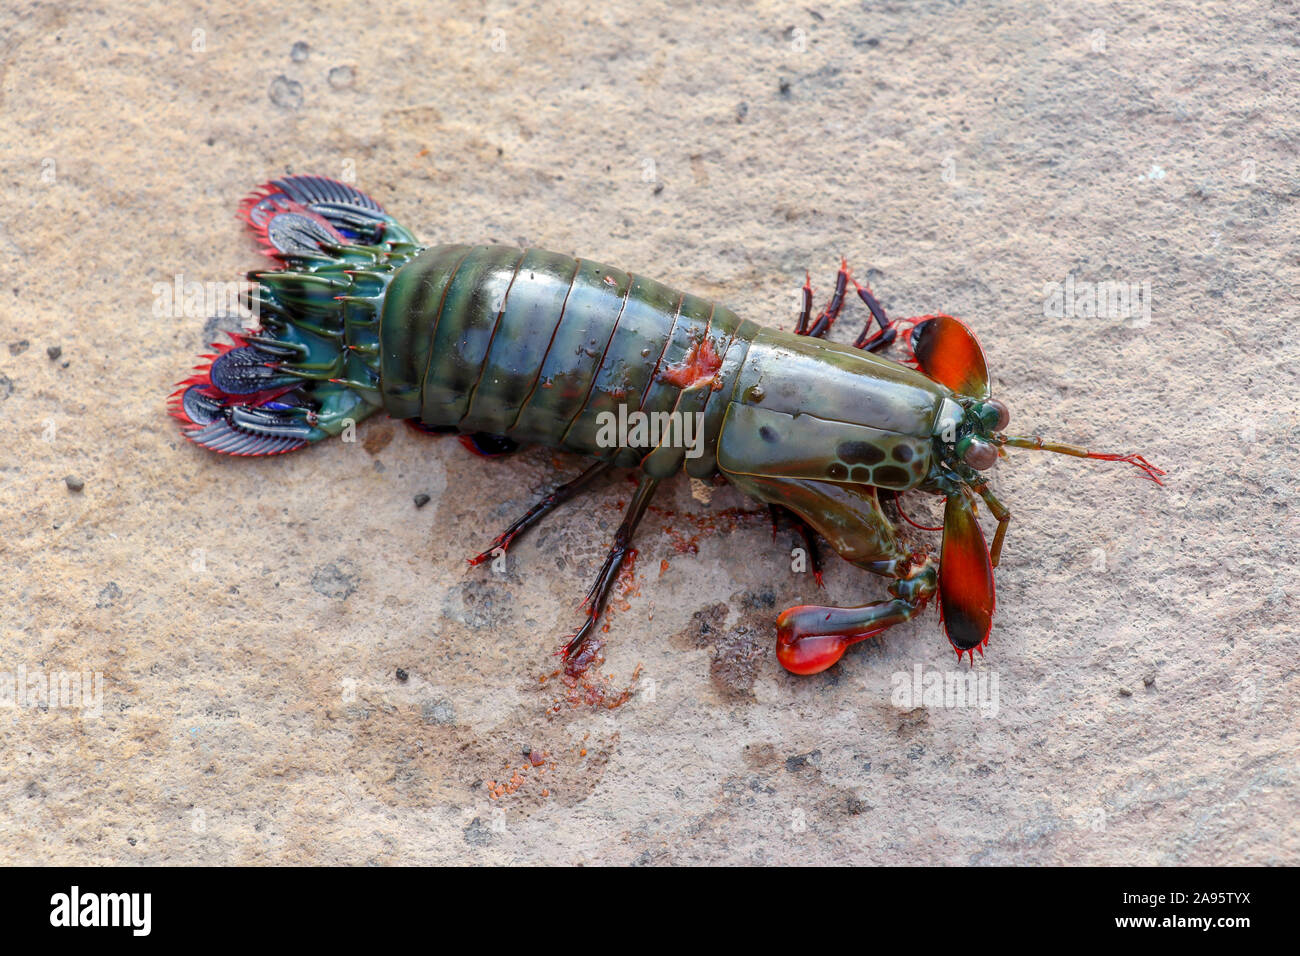 Colorful sea crustacean with dark green back and colorful tail Odontodactylus scyllarus, peacock or clown mantis shrimp on yellow stone. Top view. Stock Photo